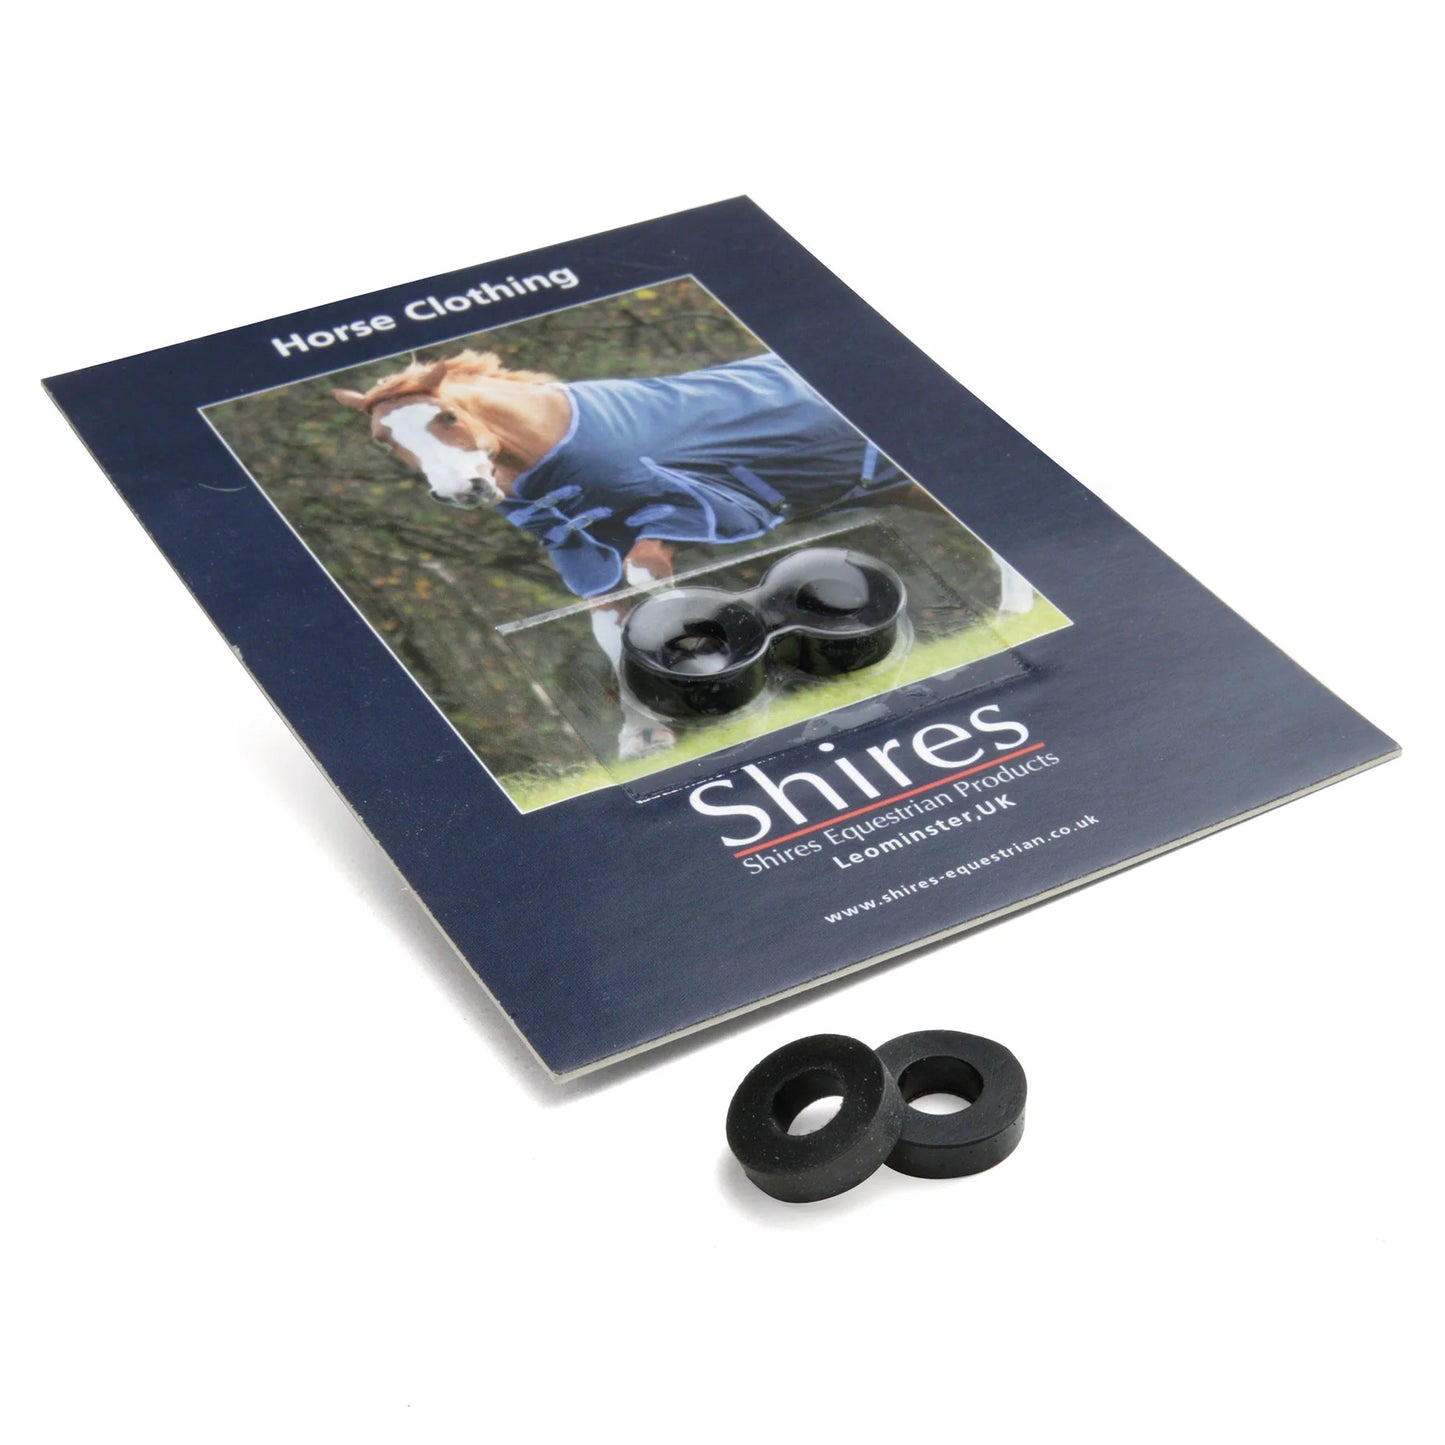 Shires spare surcingle rubber rings